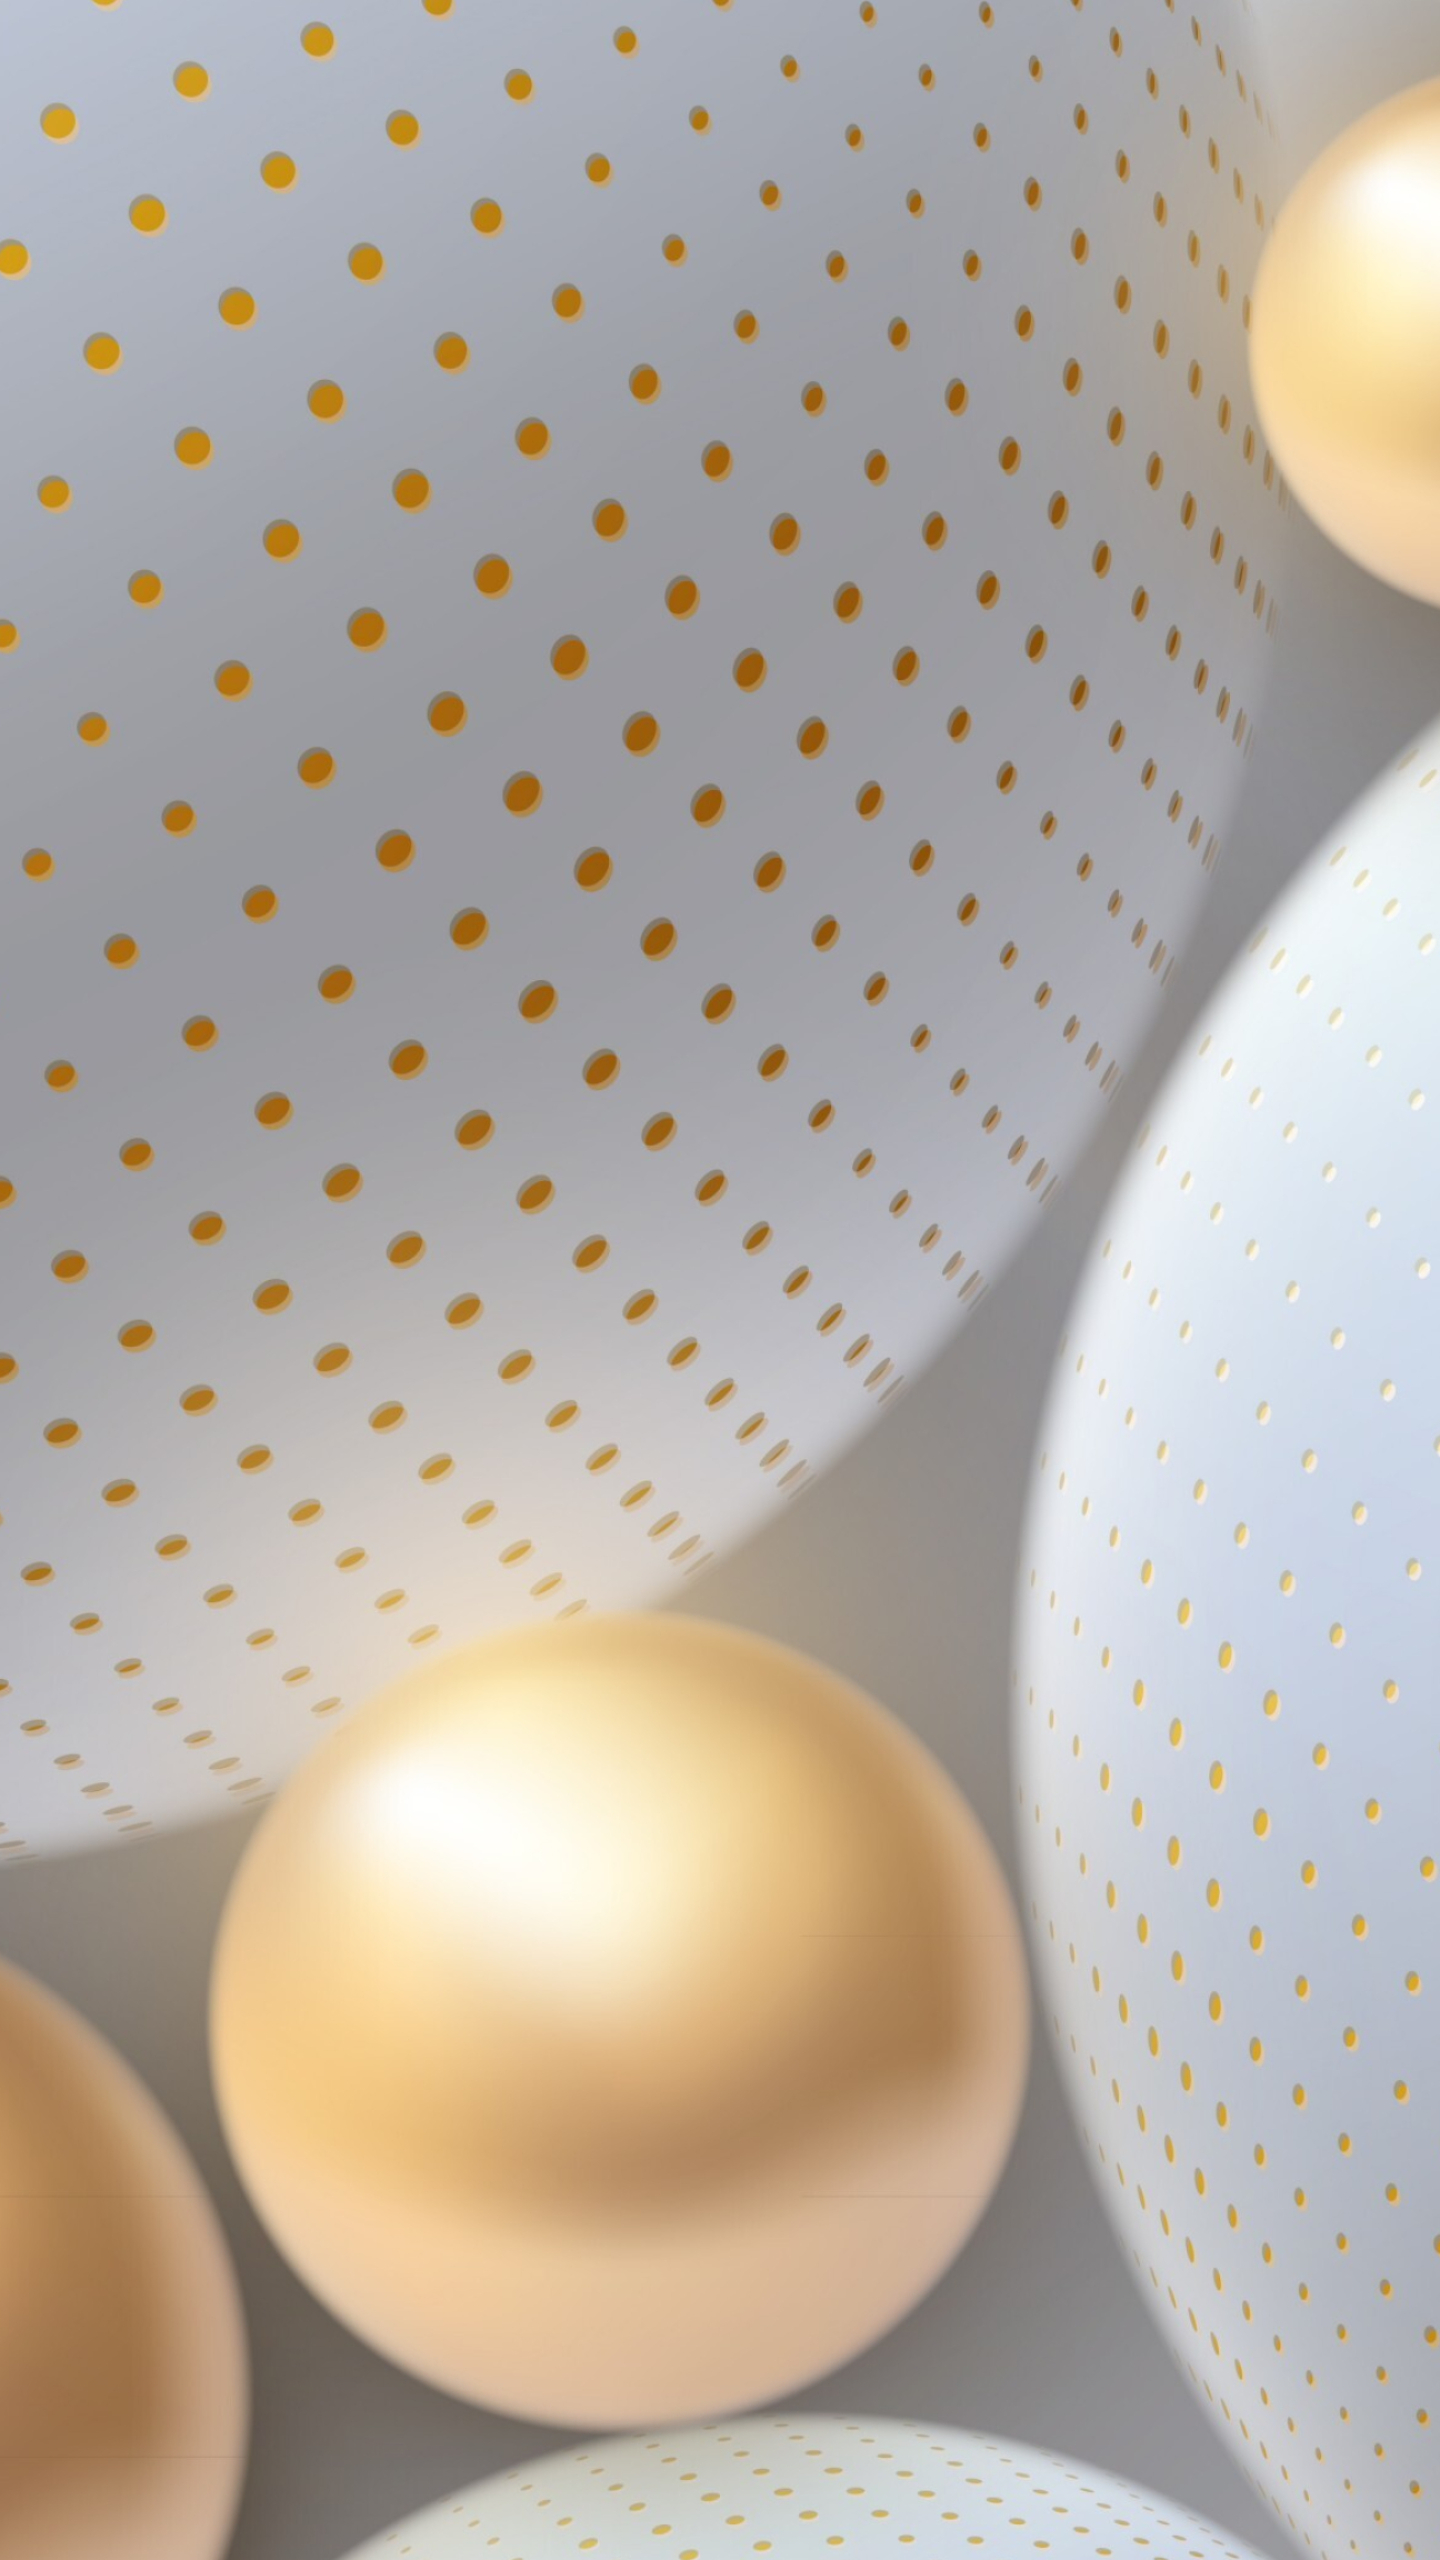 Gold Dots: Christmas baubles and hanging ornaments, Gold matte ball, Polka Dot trend. 1440x2560 HD Wallpaper.